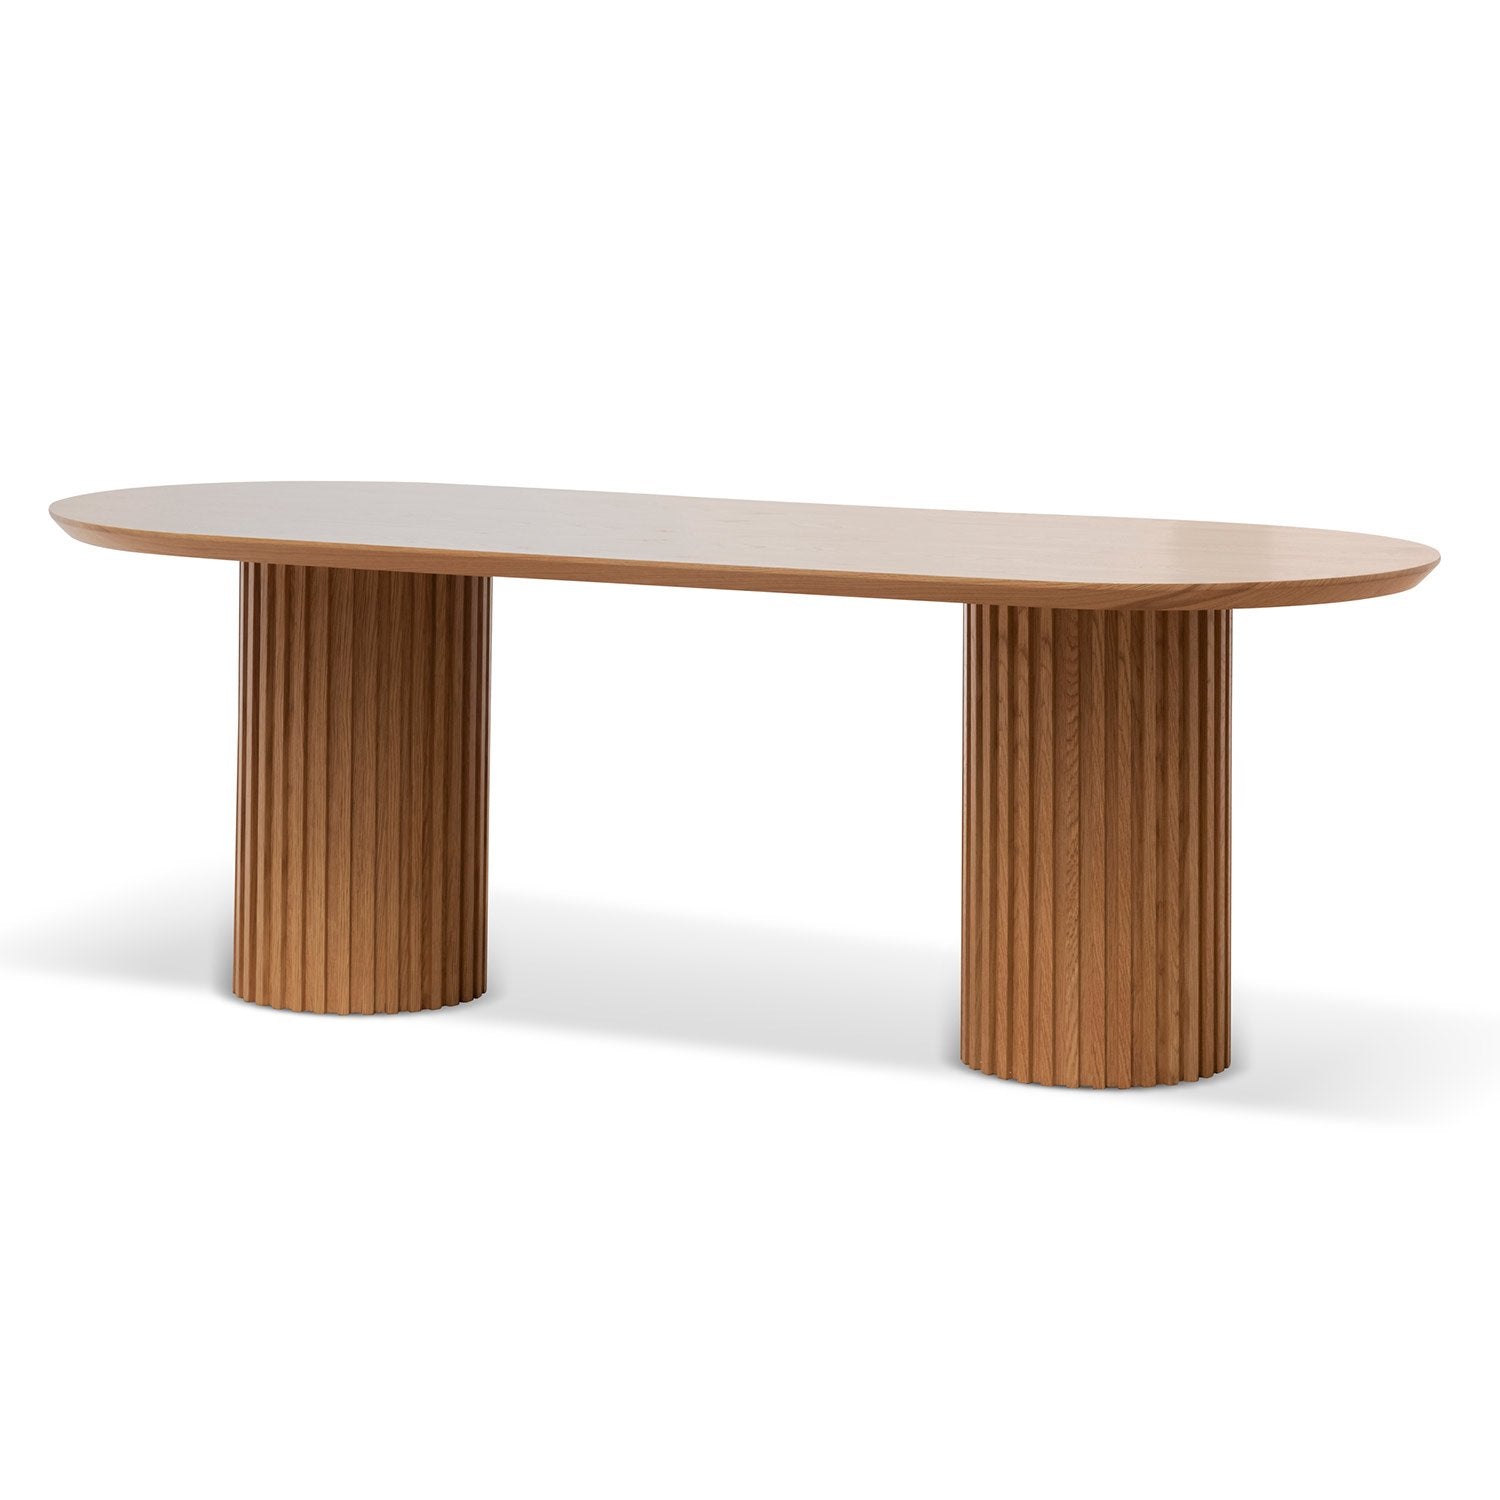 Vics 2.2m Wooden Dining Table - Natural - Dining Tables